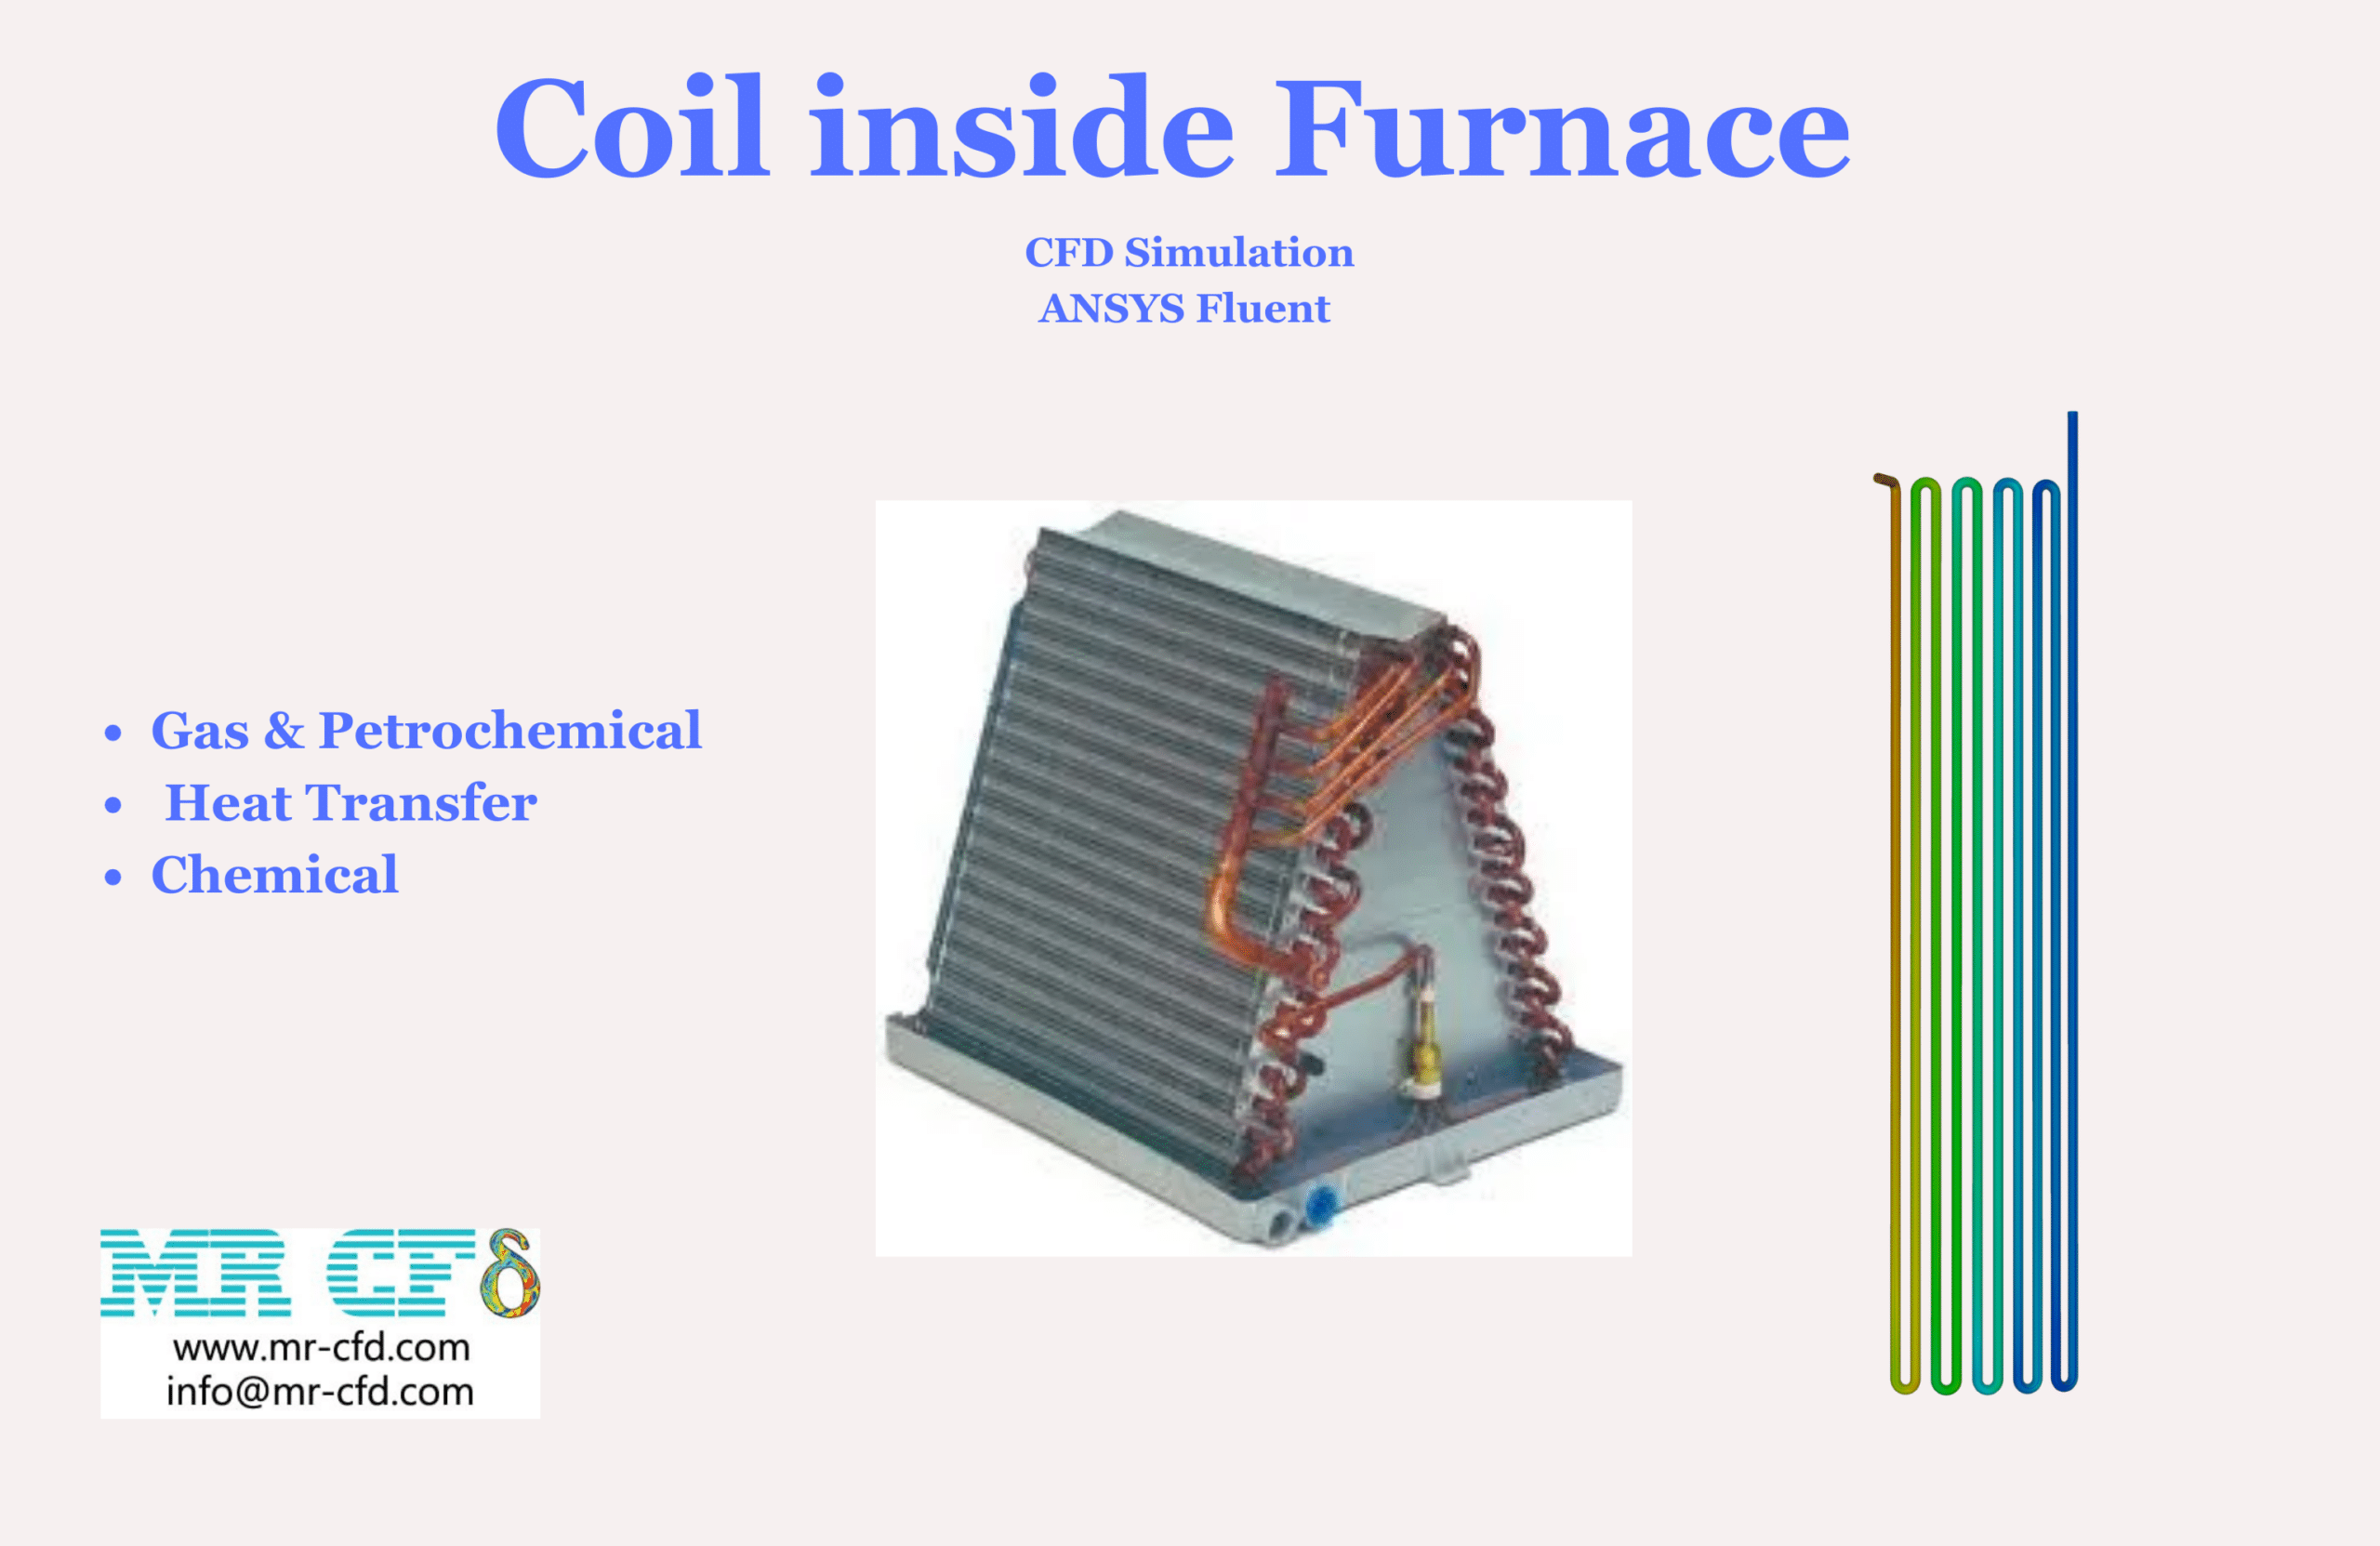 Coil inside Furnace CFD Simulation, ANSYS Fluent Tutorial